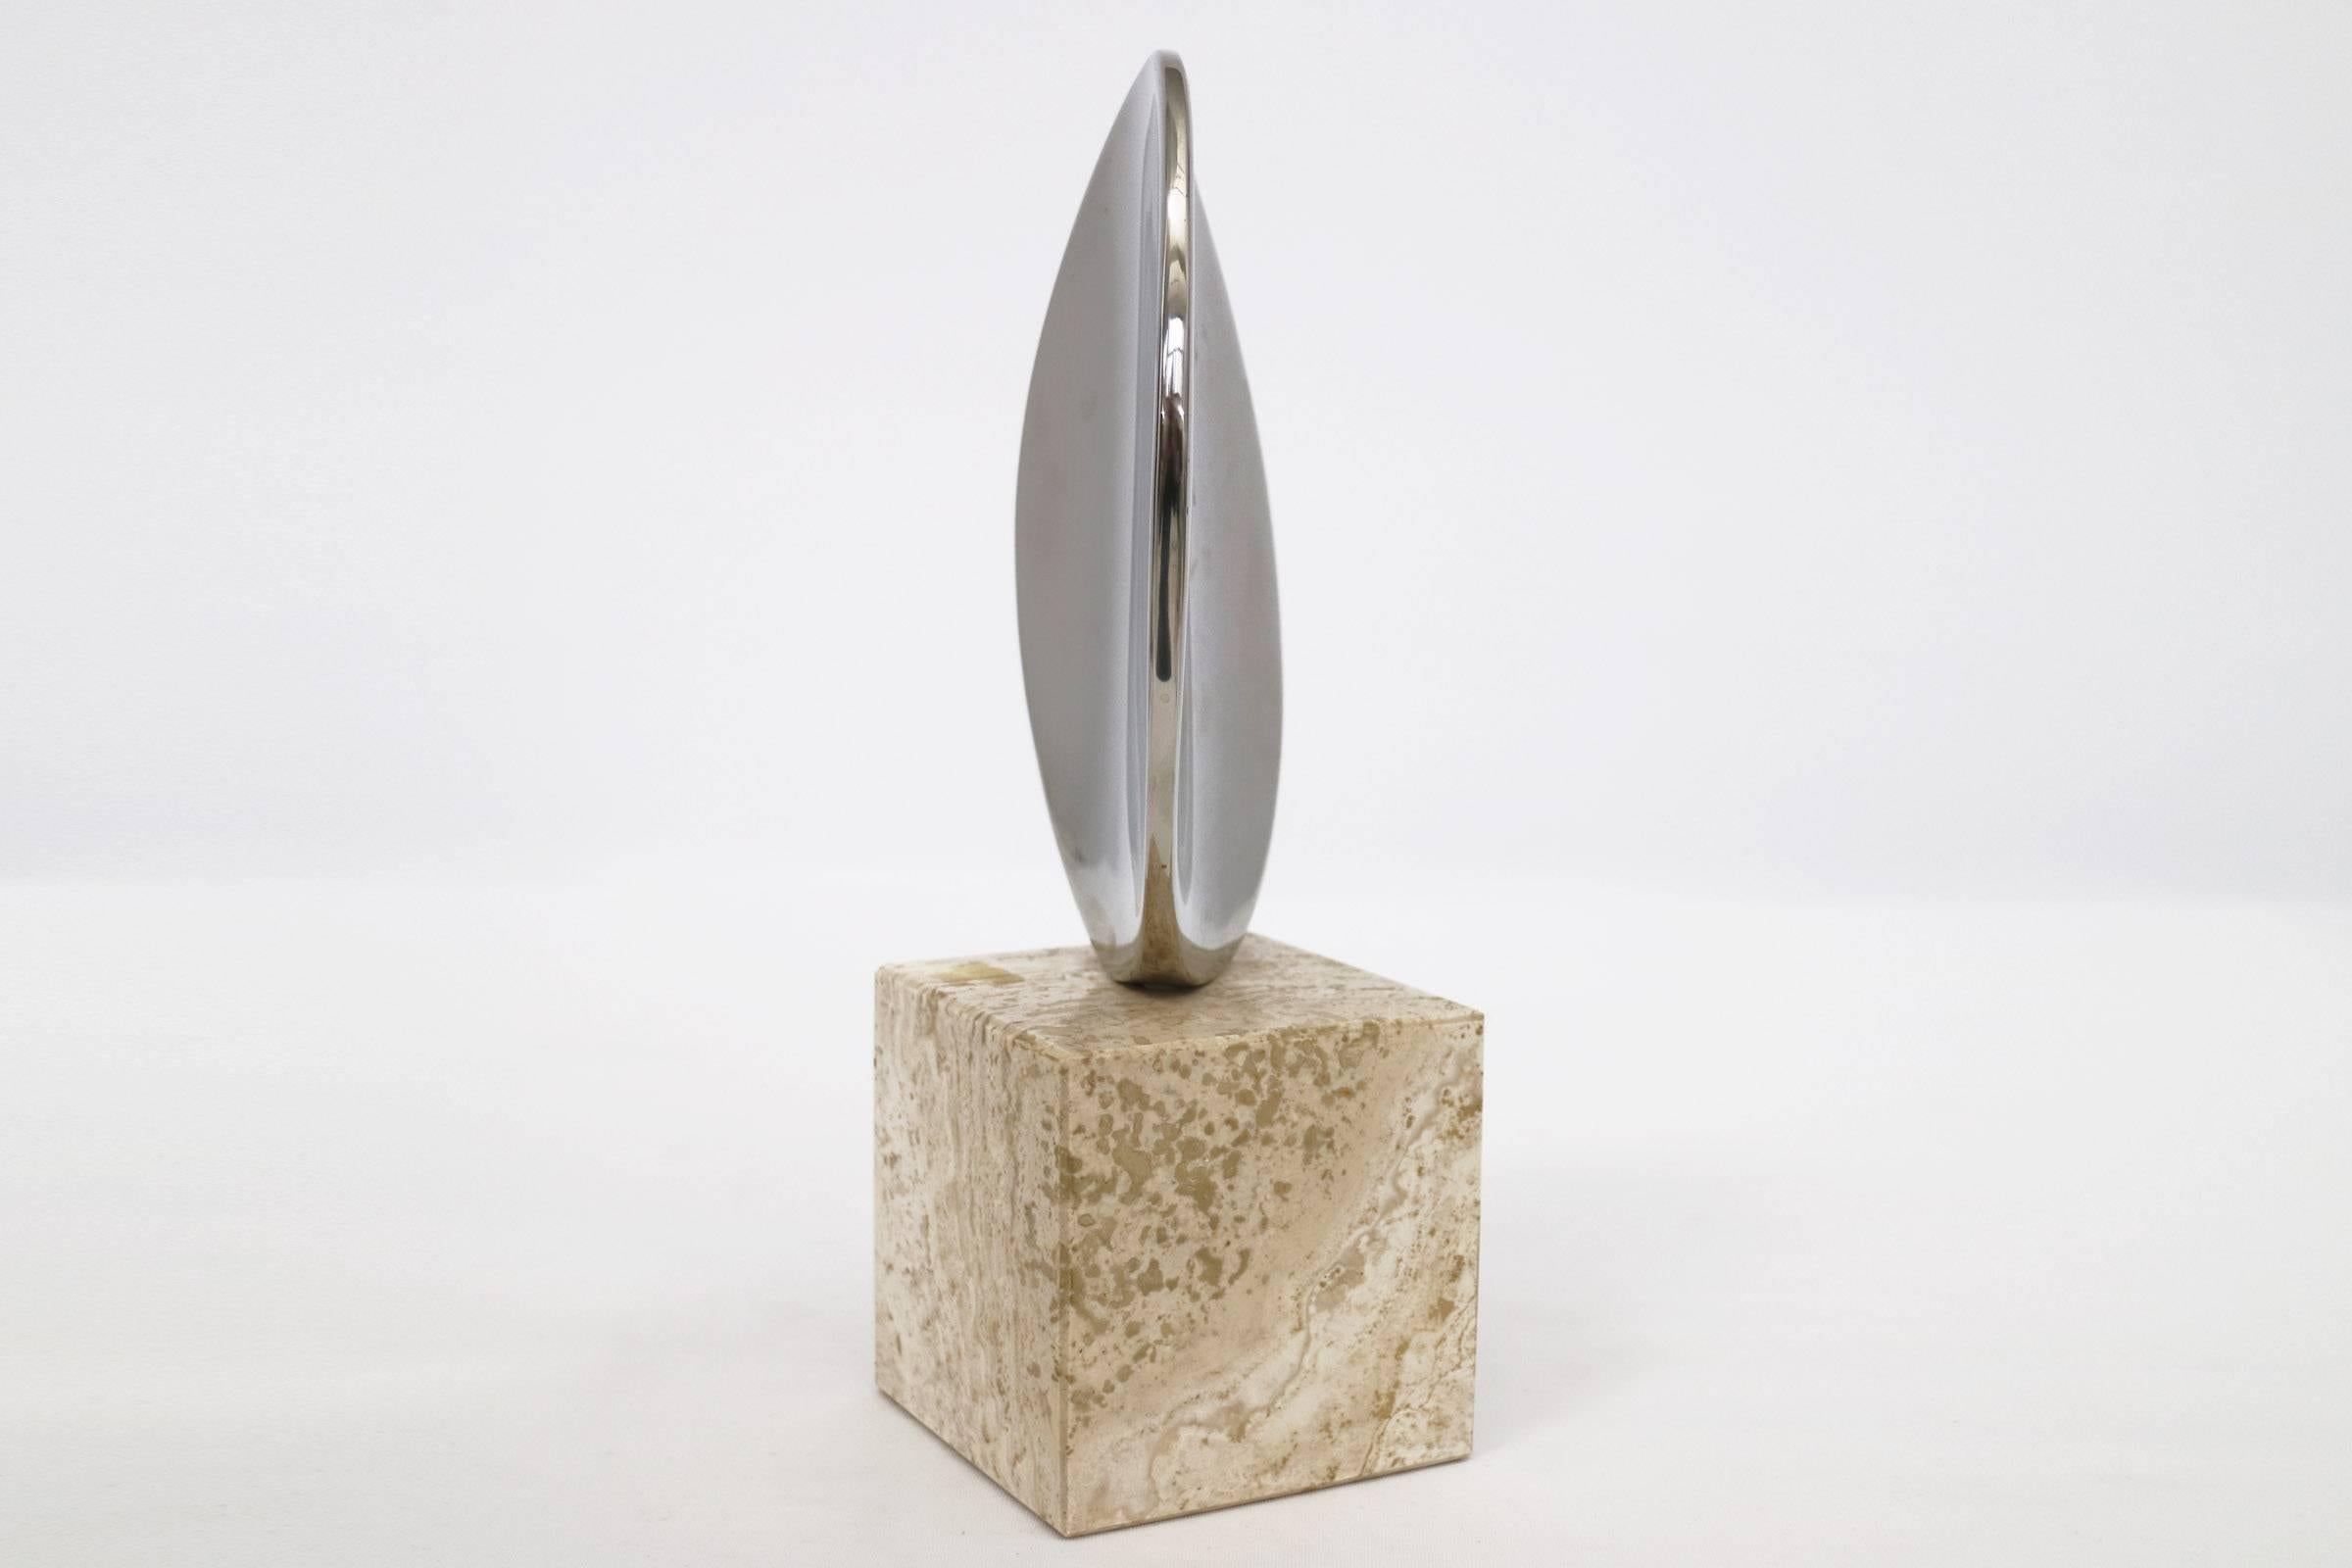 Unsigned nickel plated and travertine sculpture.